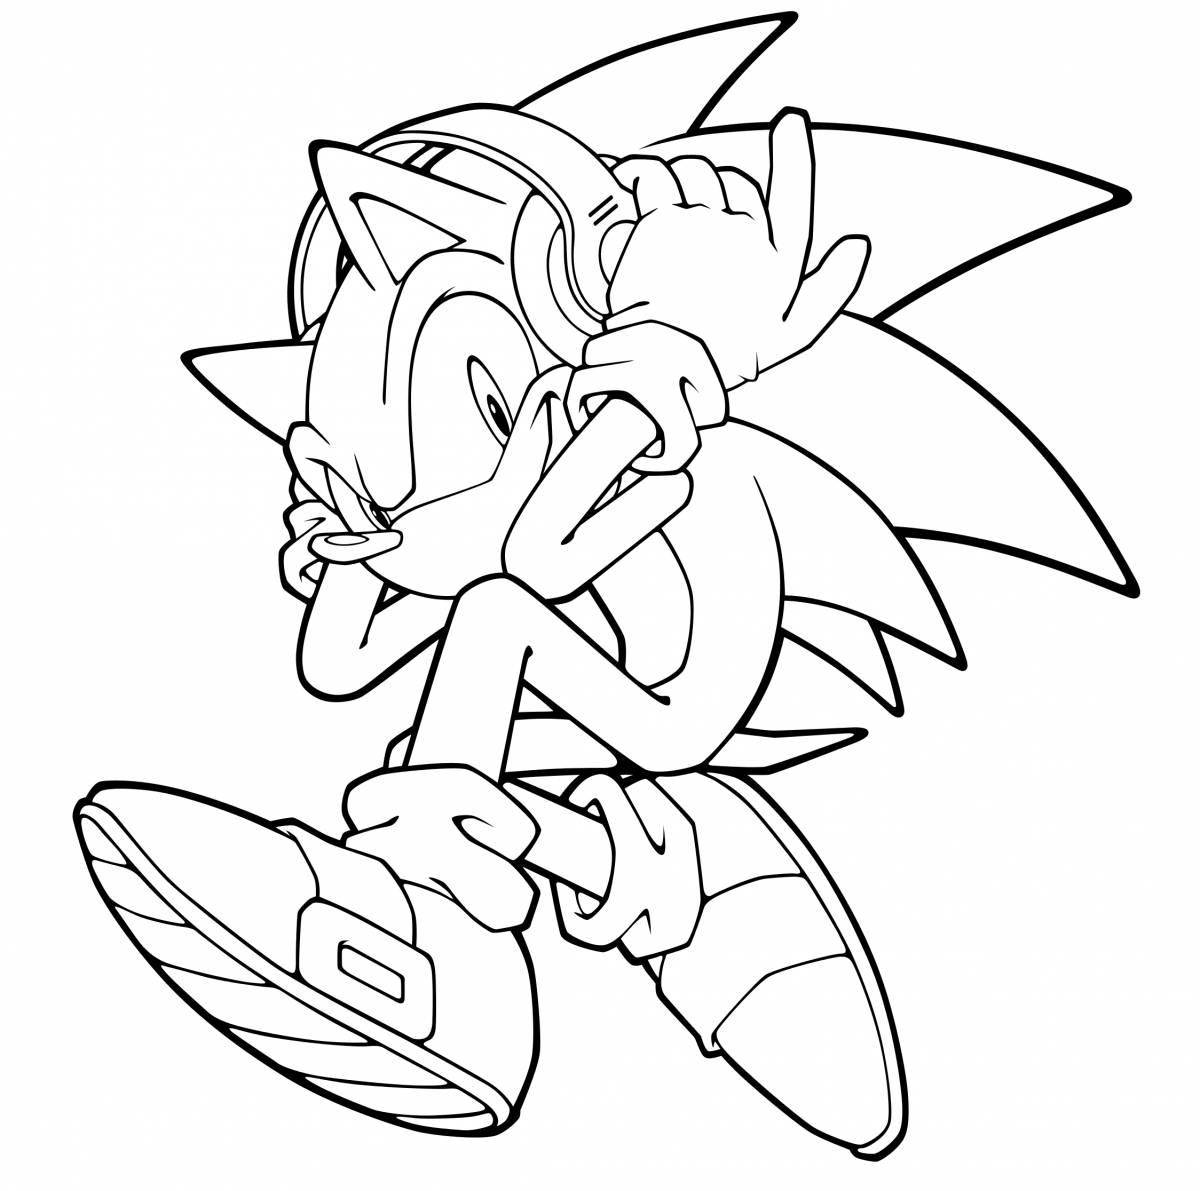 Cool super sonic the hedgehog coloring page